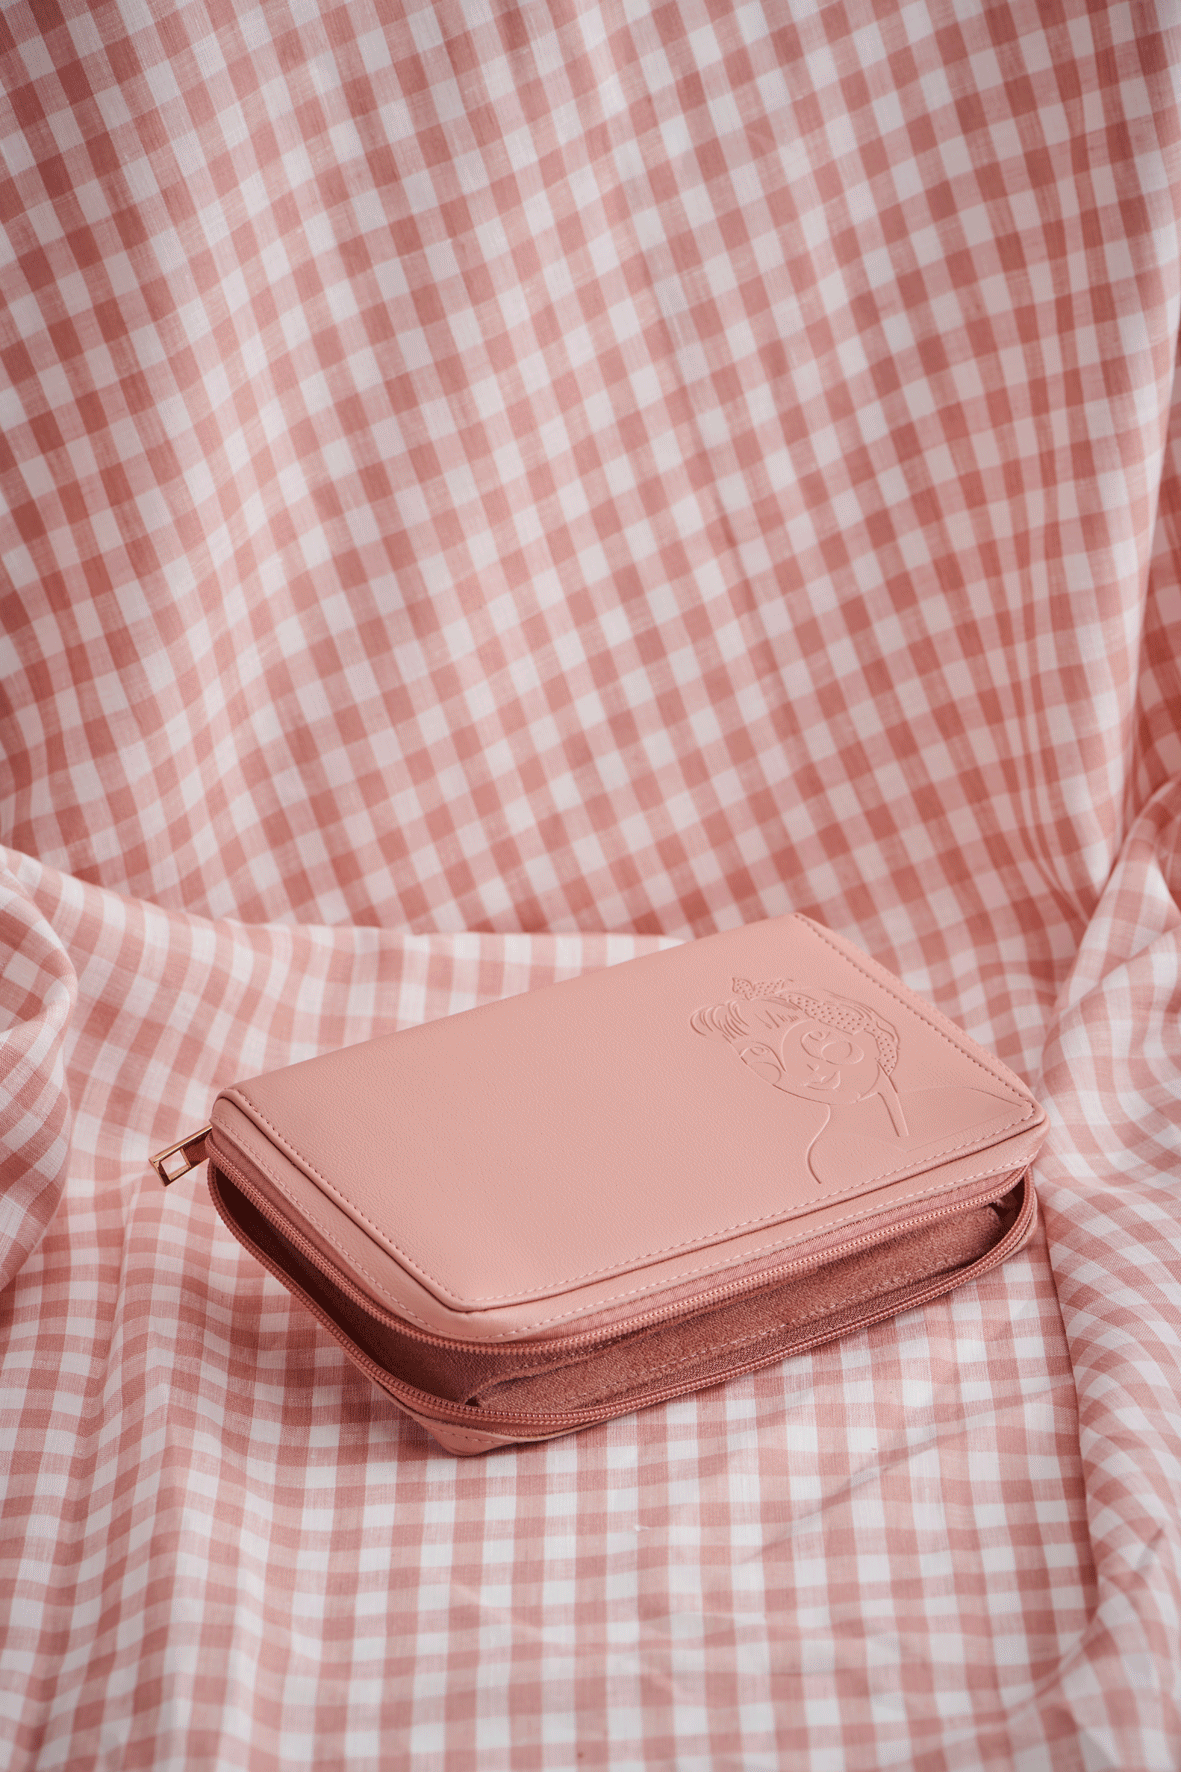 A moving image of a pink jewellery wallet on a pink check fabric background. It displays the functionality with the opening of the wallet, flaps and pockets and displays earrings and a necklace. The wallet then closes up again.